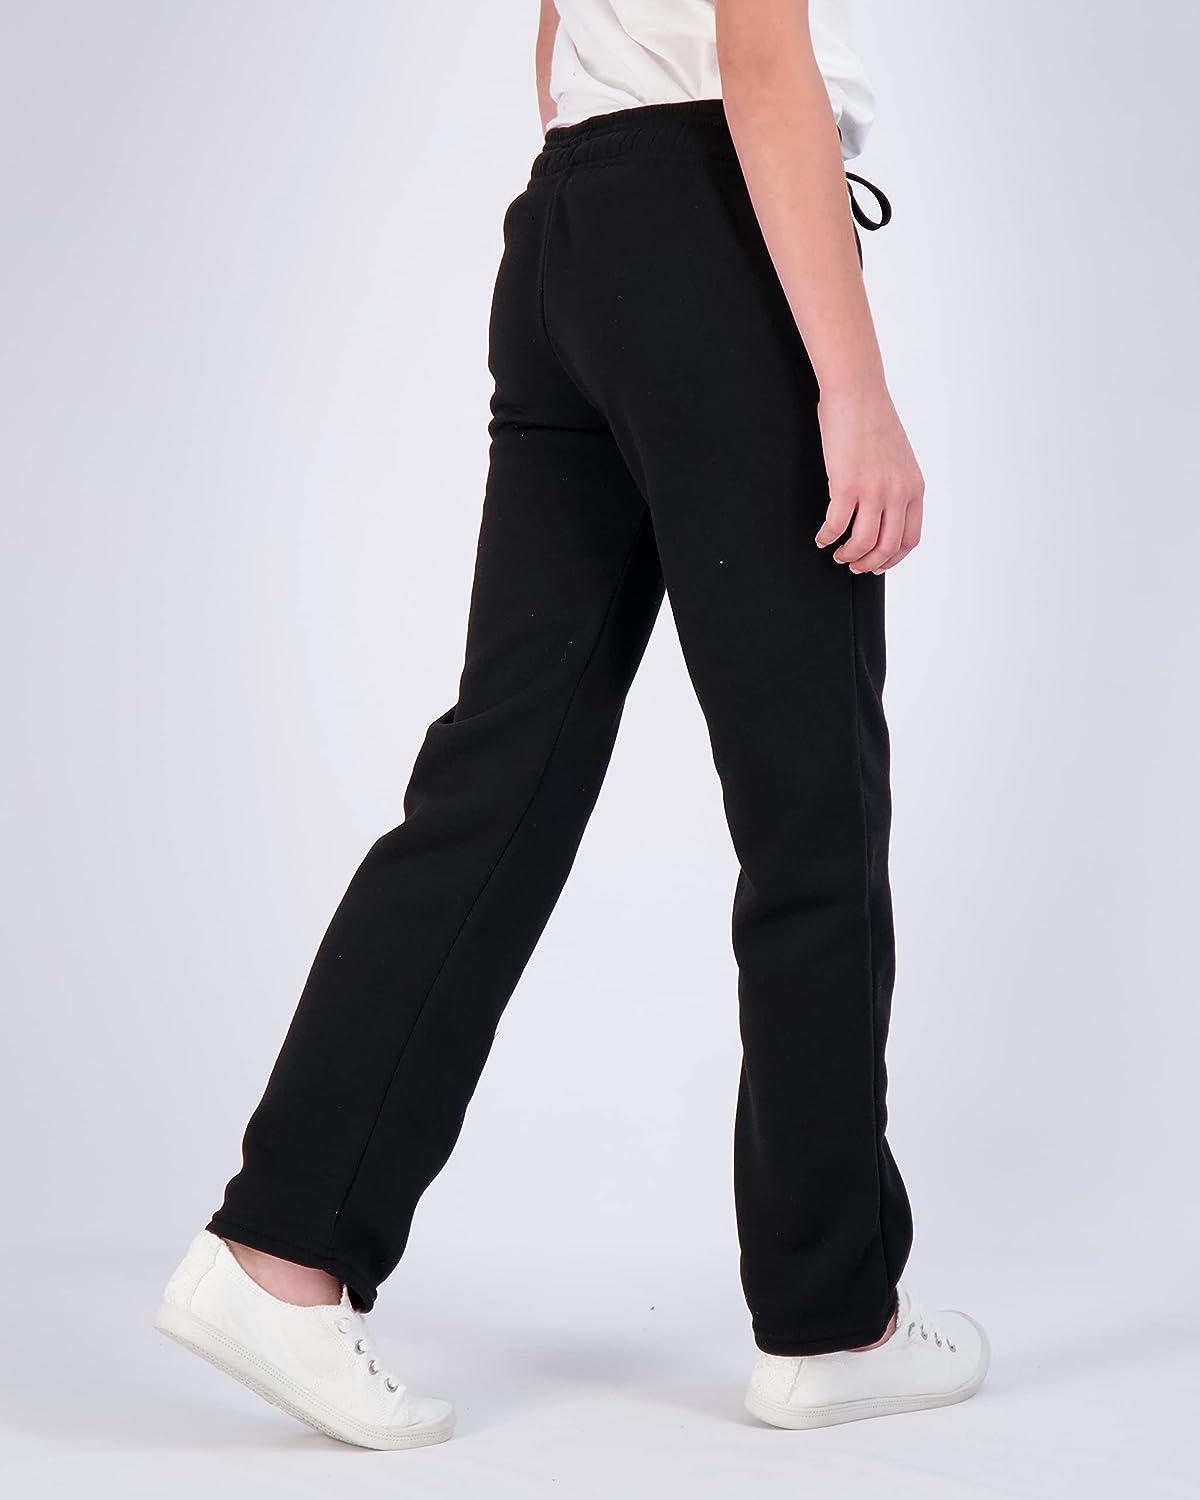 Real Essentials 3 Pack: Girls' Fleece Open Bottom Soft Athletic Performance  Casual Sweatpants(Ages 7-16) Large Set 3